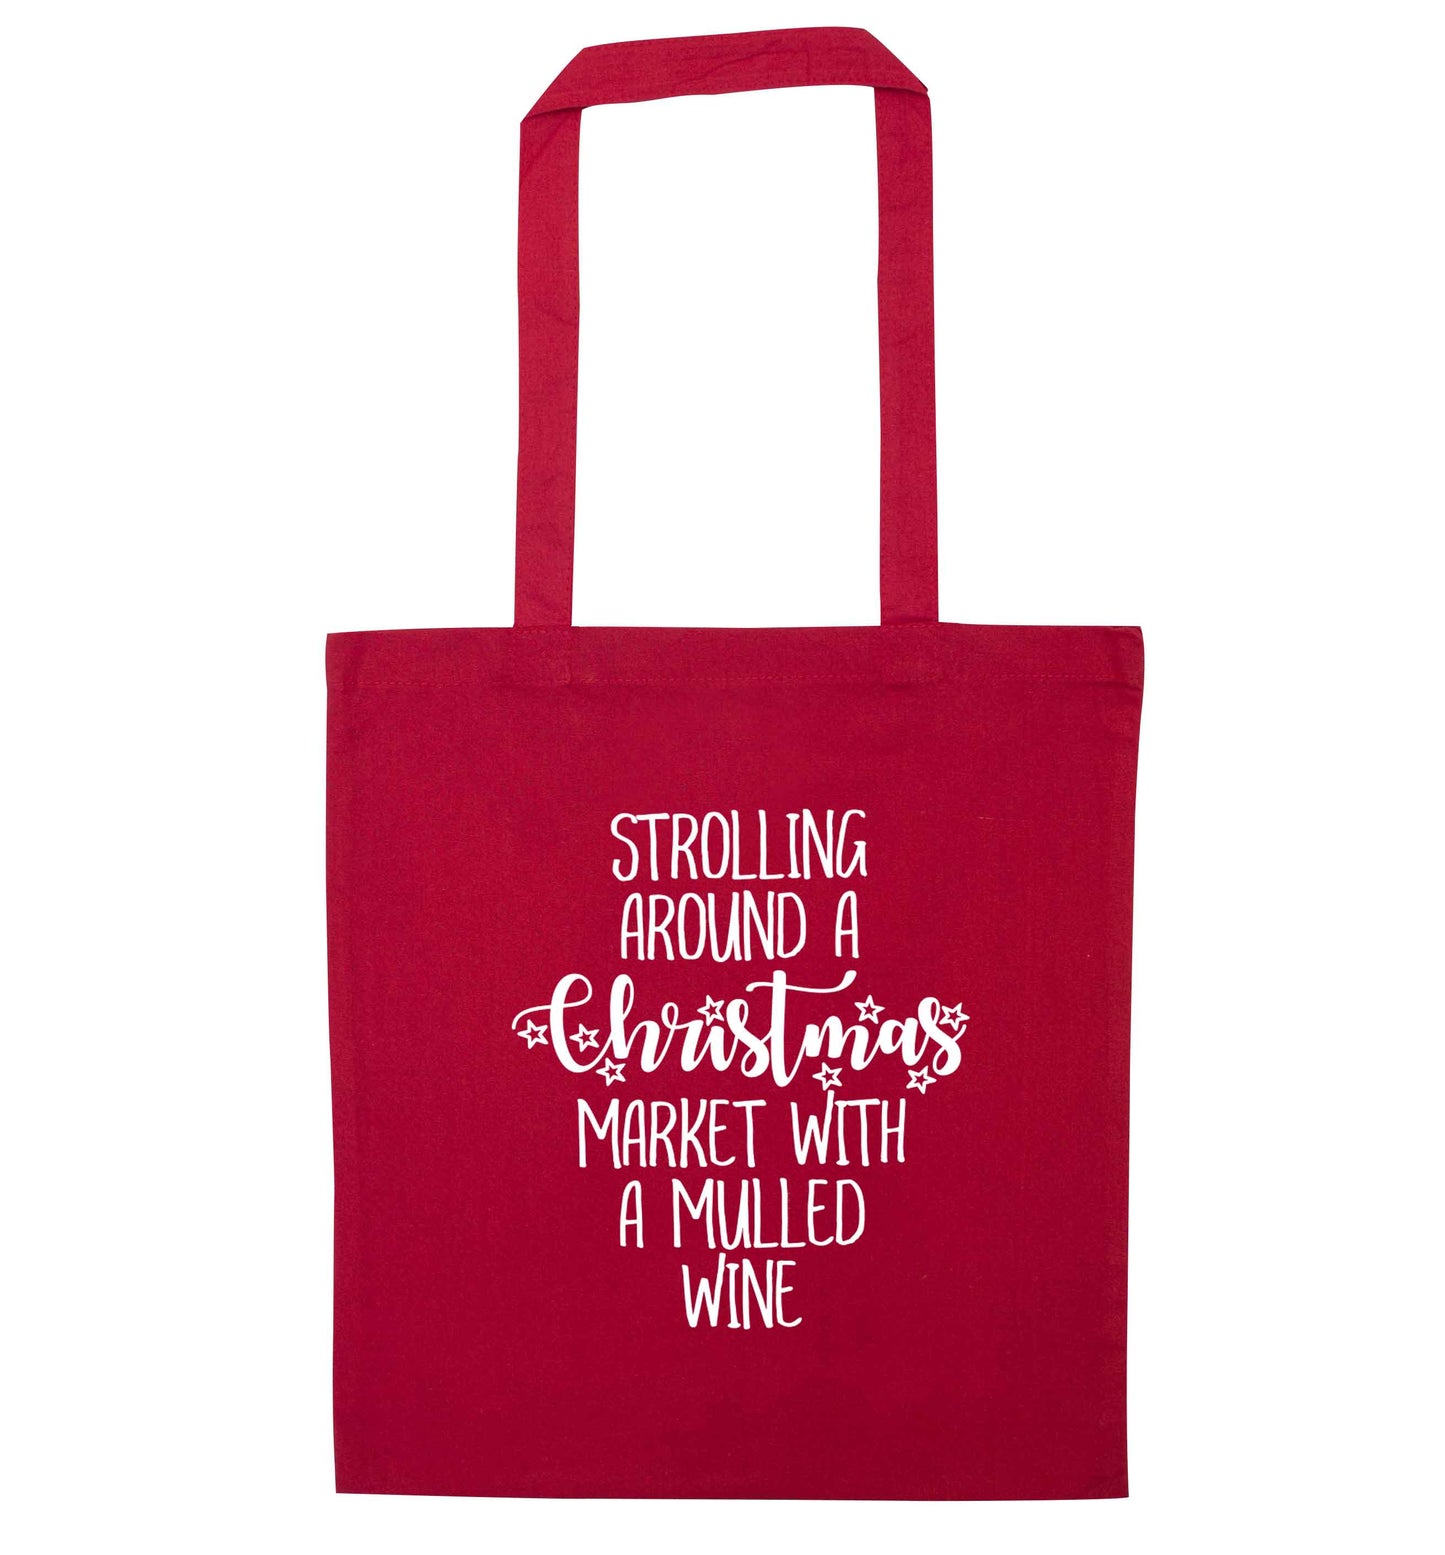 Strolling around a Christmas market with mulled wine red tote bag